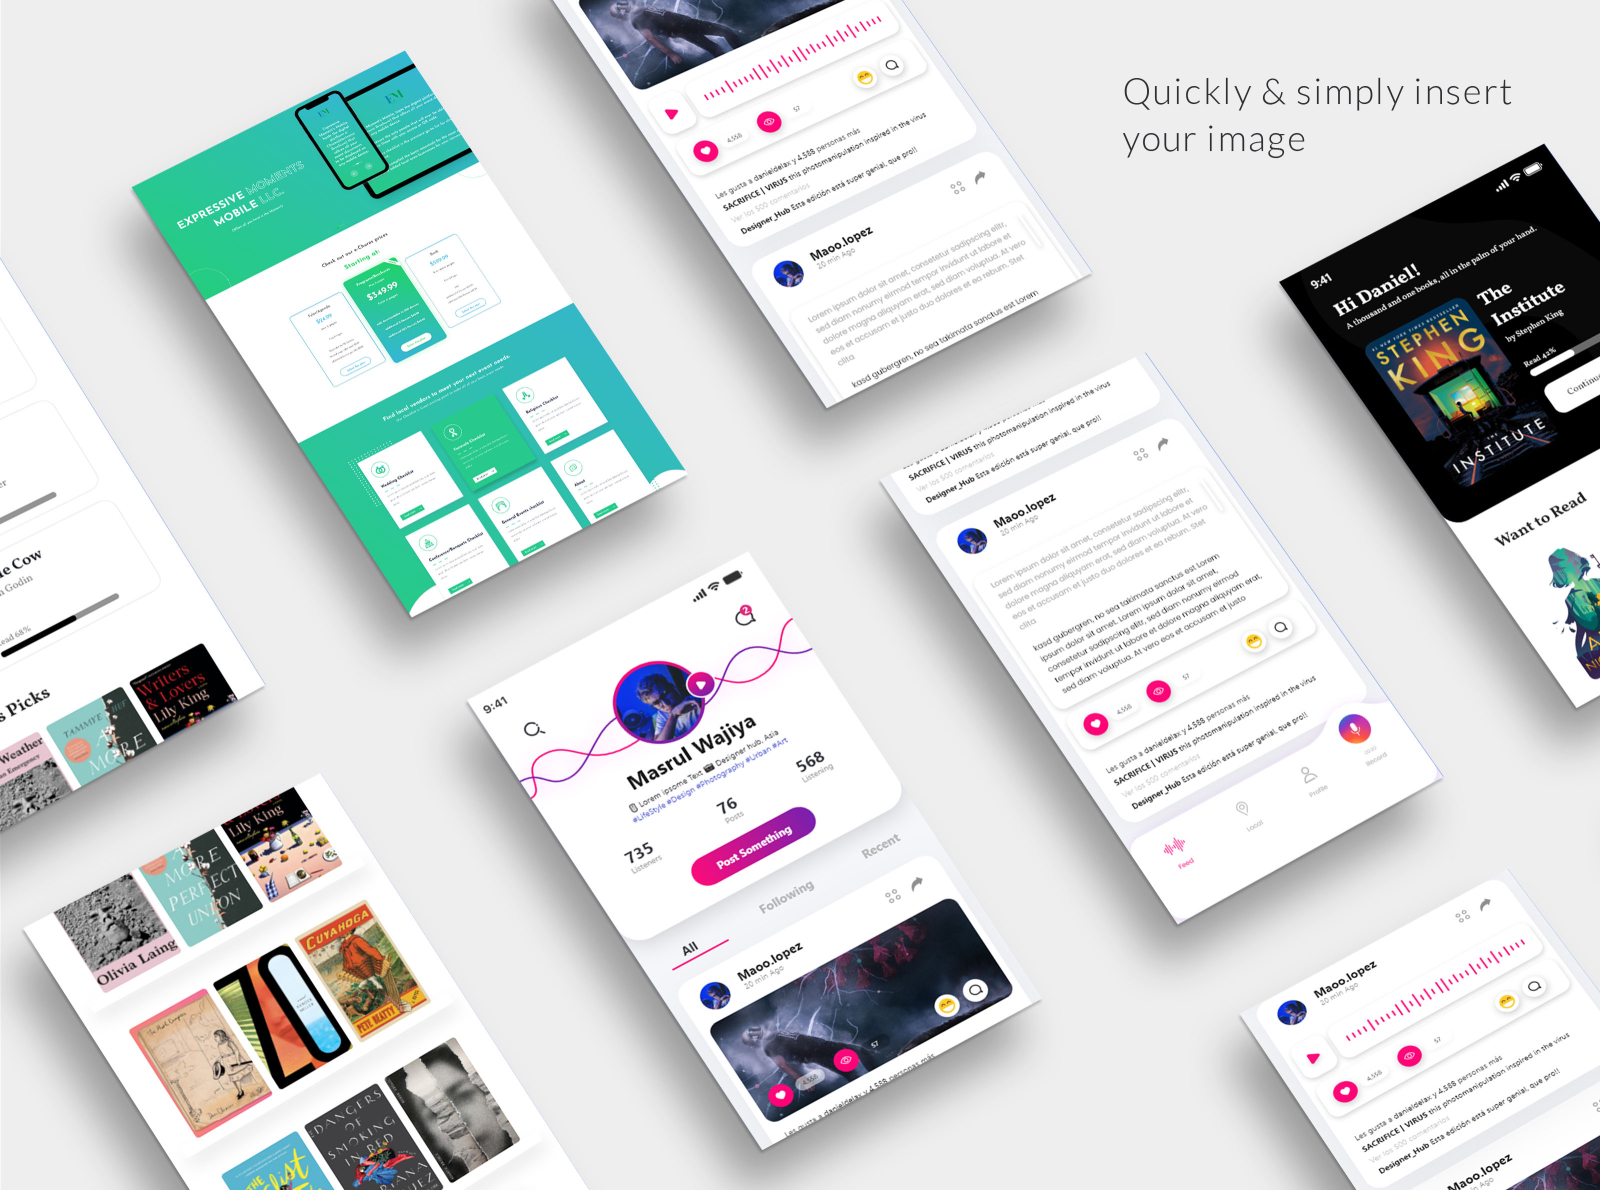 different hope page designs in mockup by Haseeb Qureshi on Dribbble